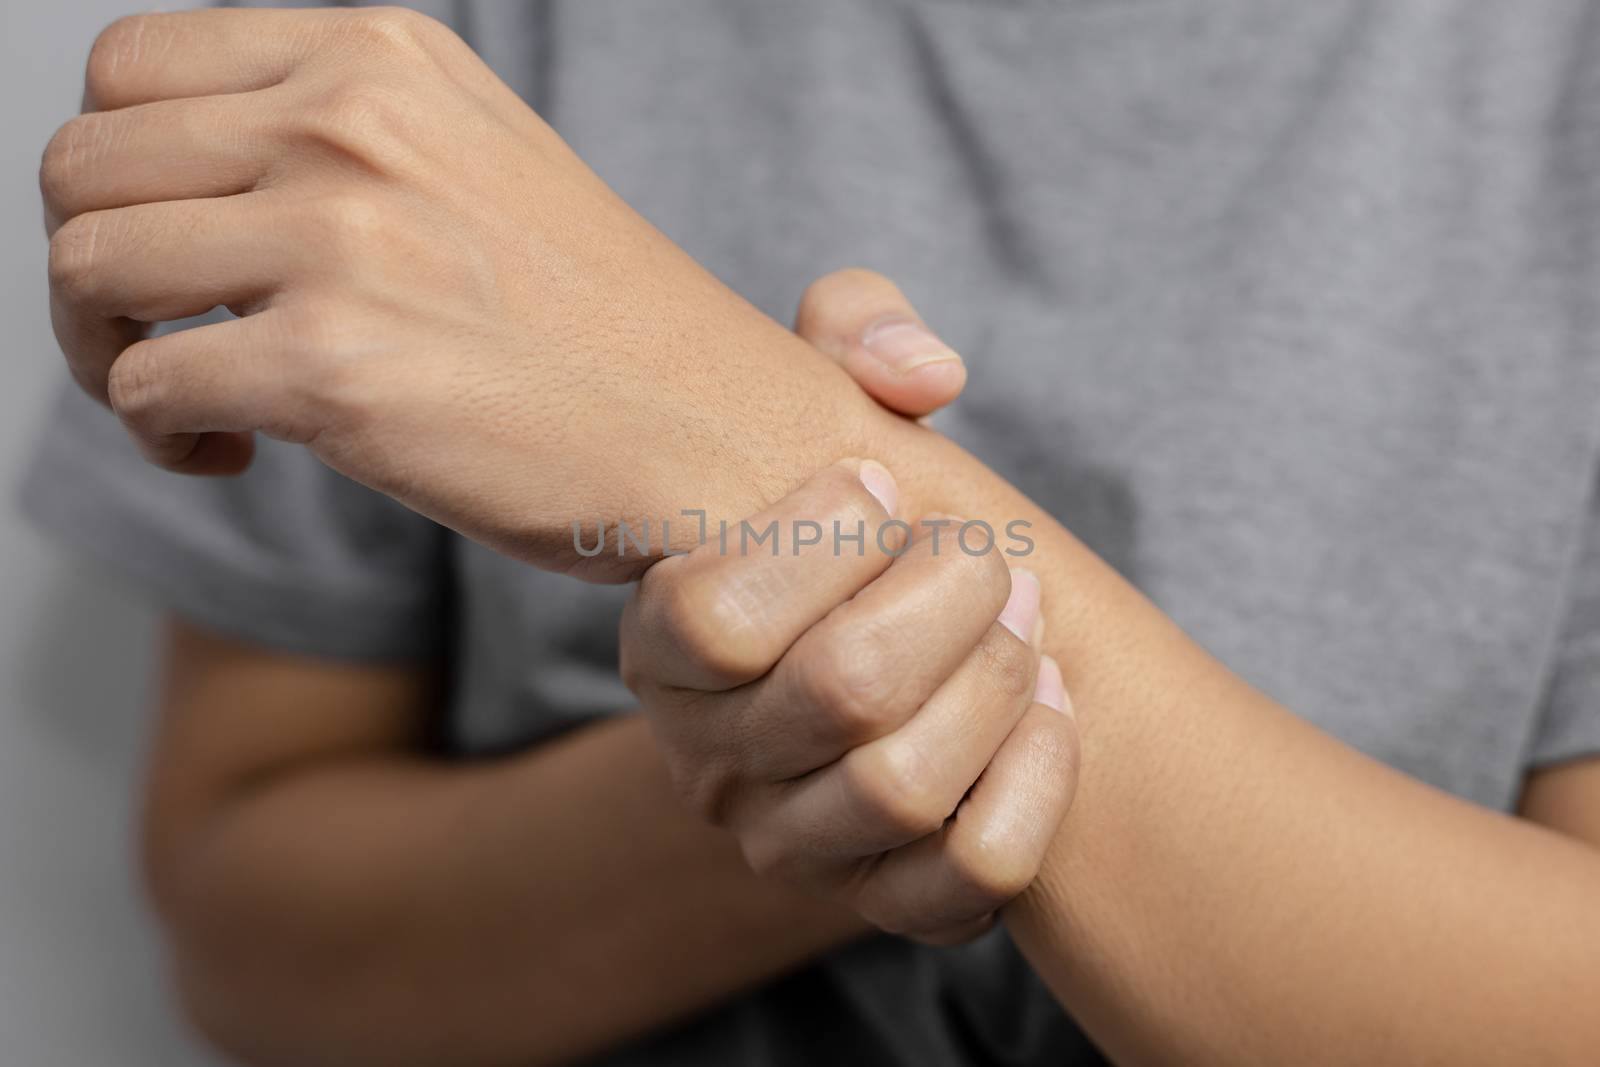 Woman suffering from pain in wrist. Pain in a women wrist. Young woman holding her painful wrist on wall background.